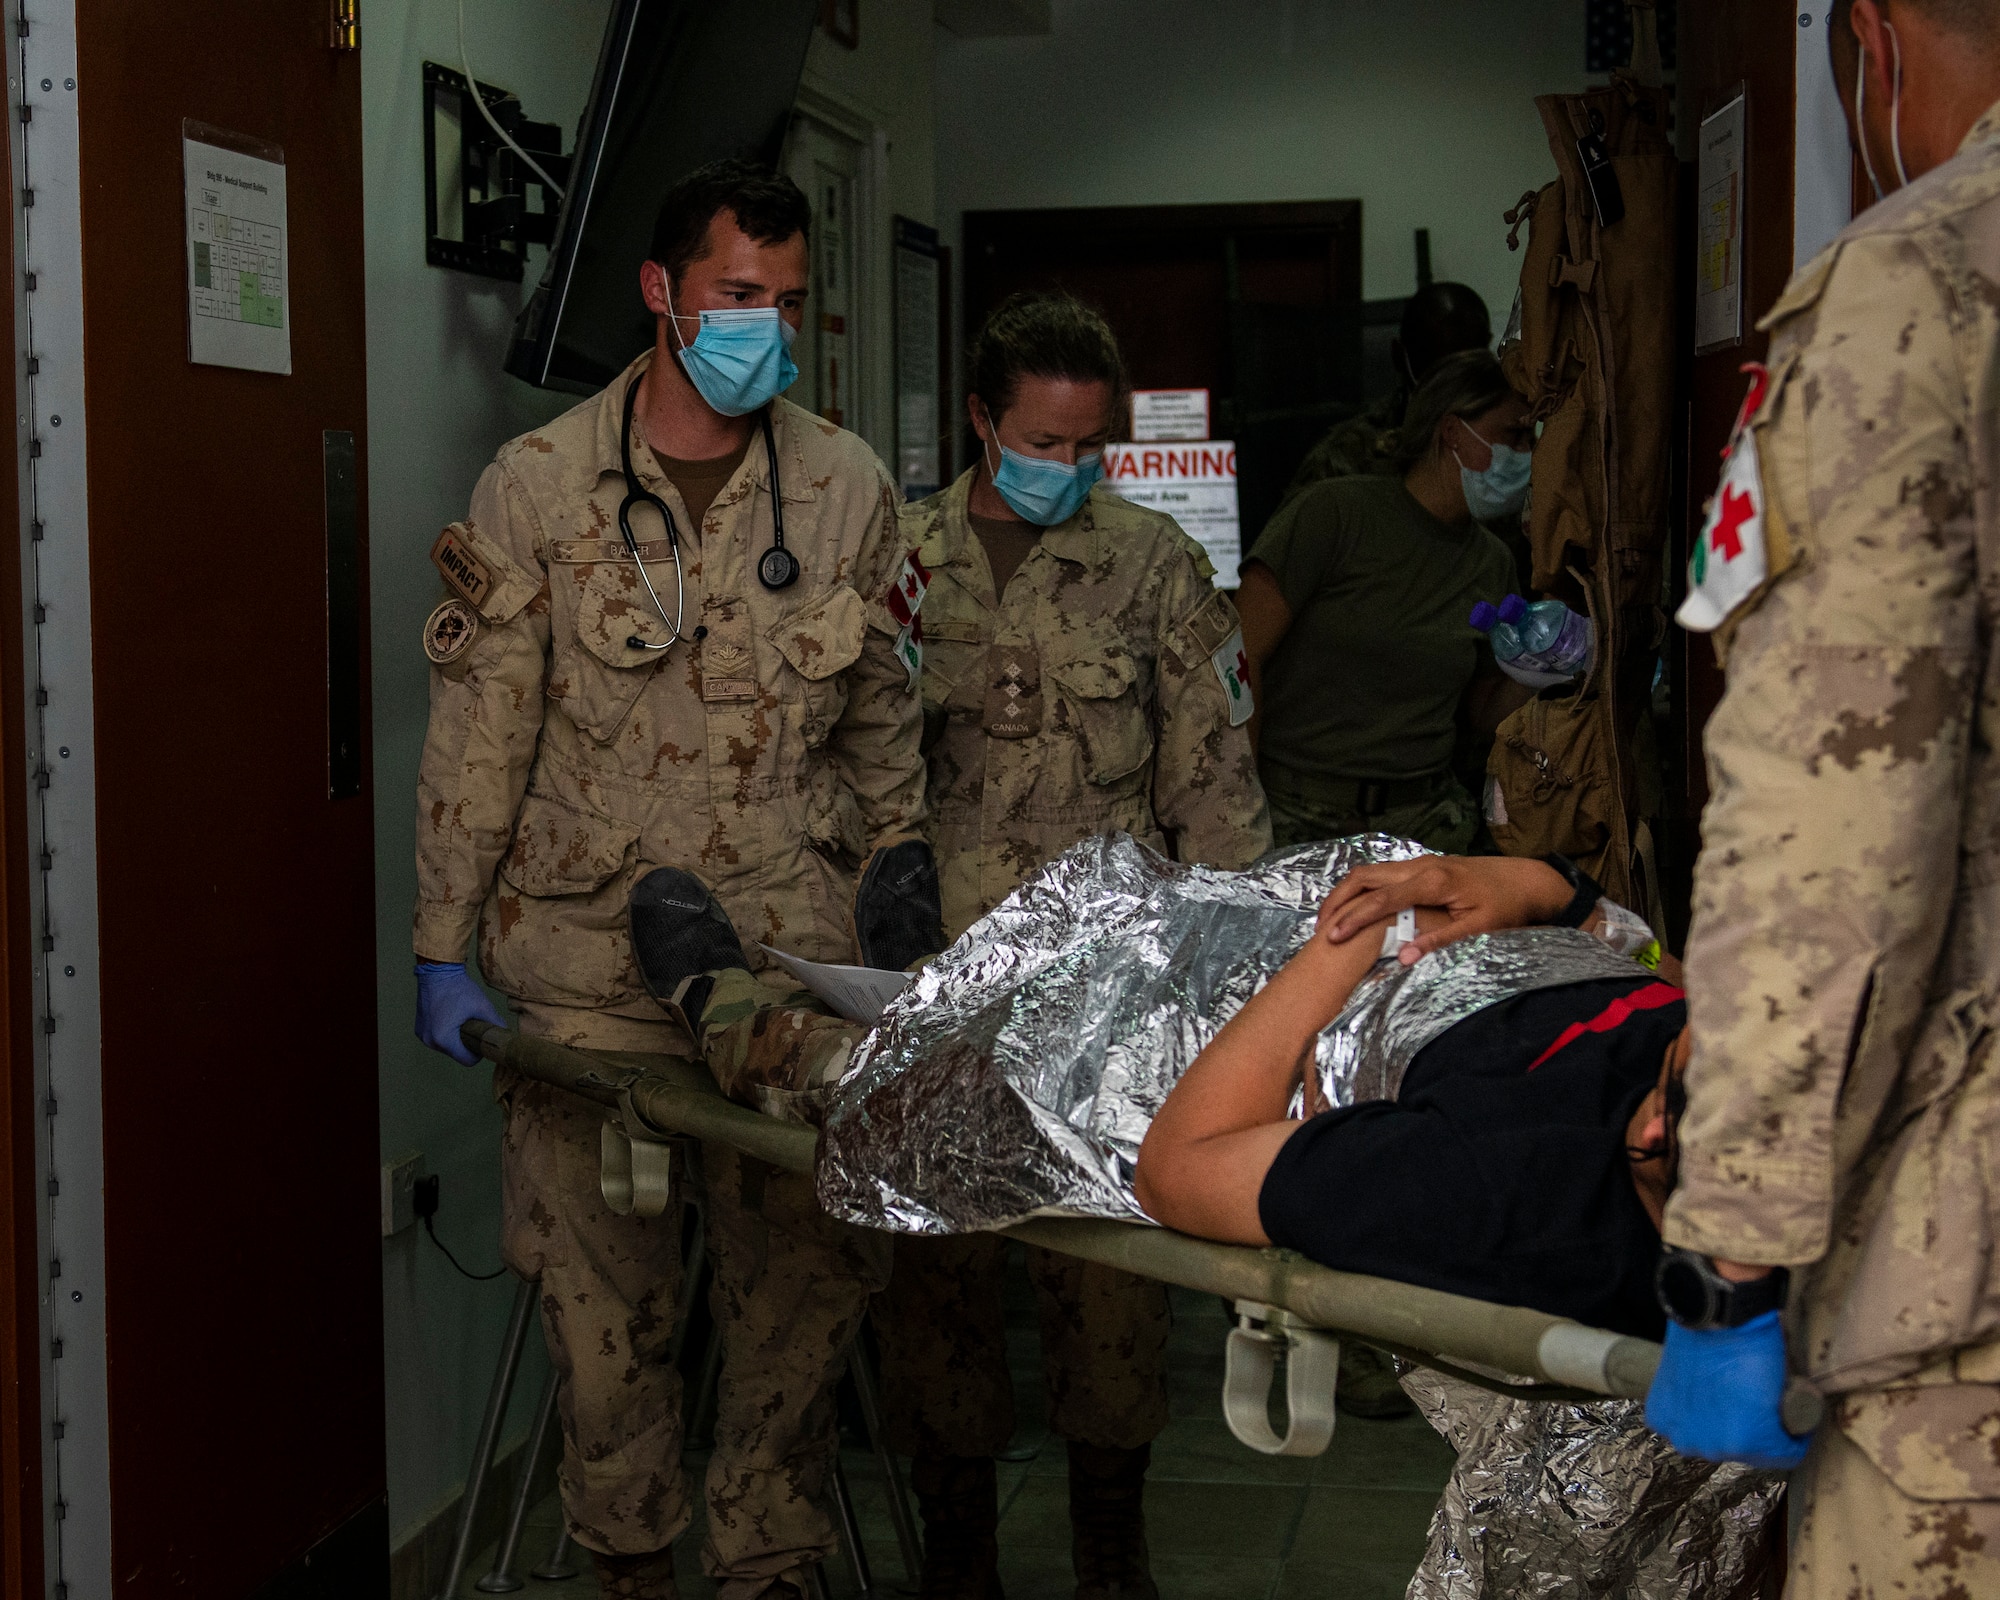 Medical personnel carry a stretcher into a room.